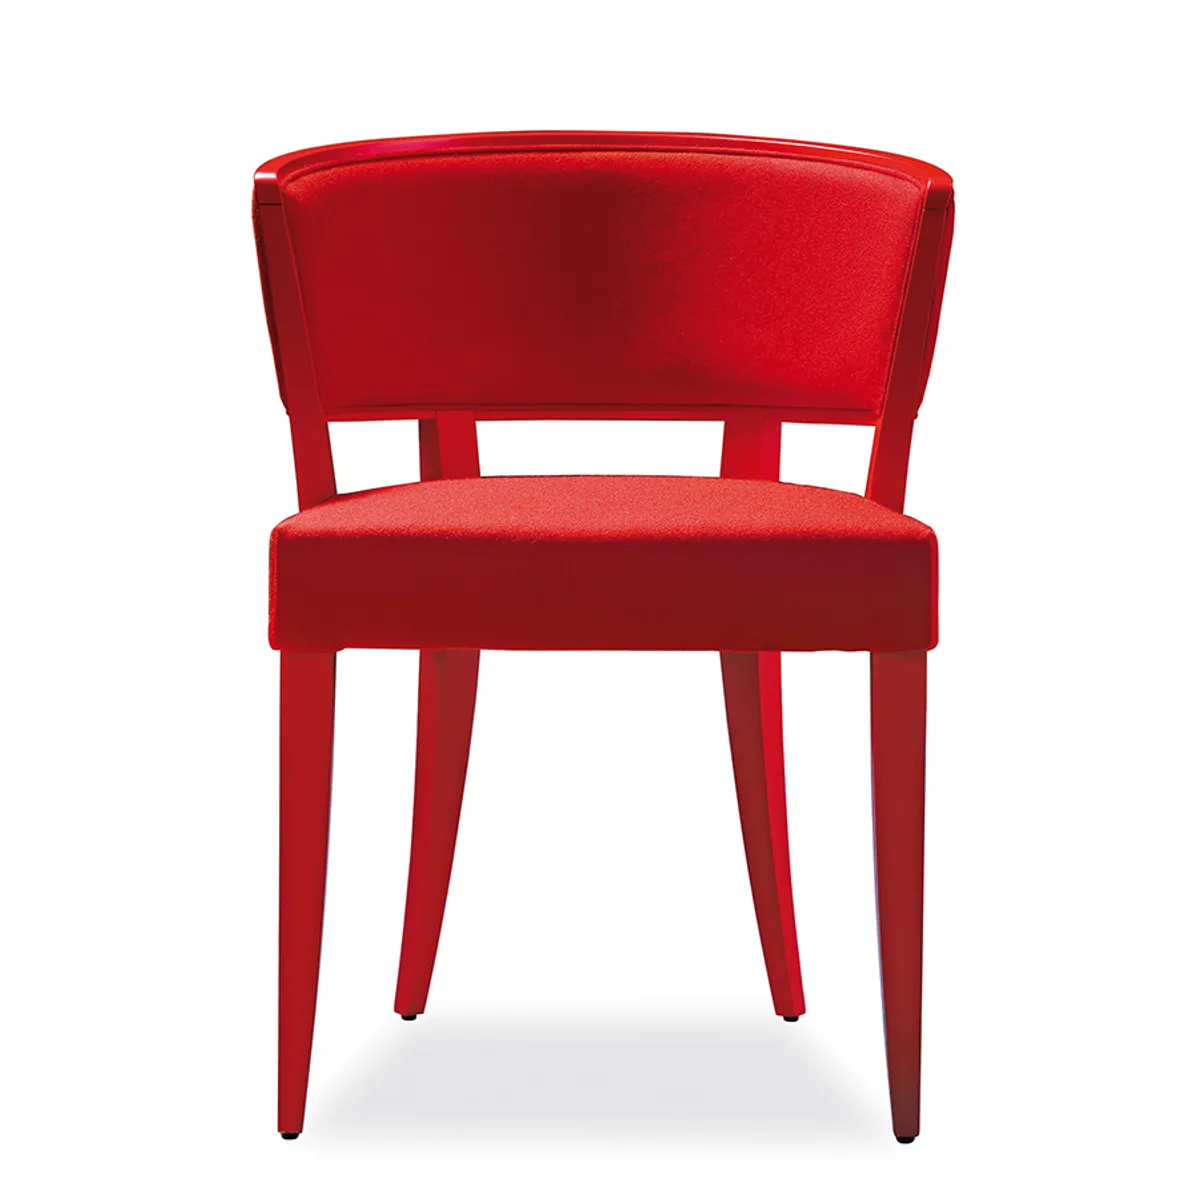 Hero Chair Red Fabric Red Wood Frame 04